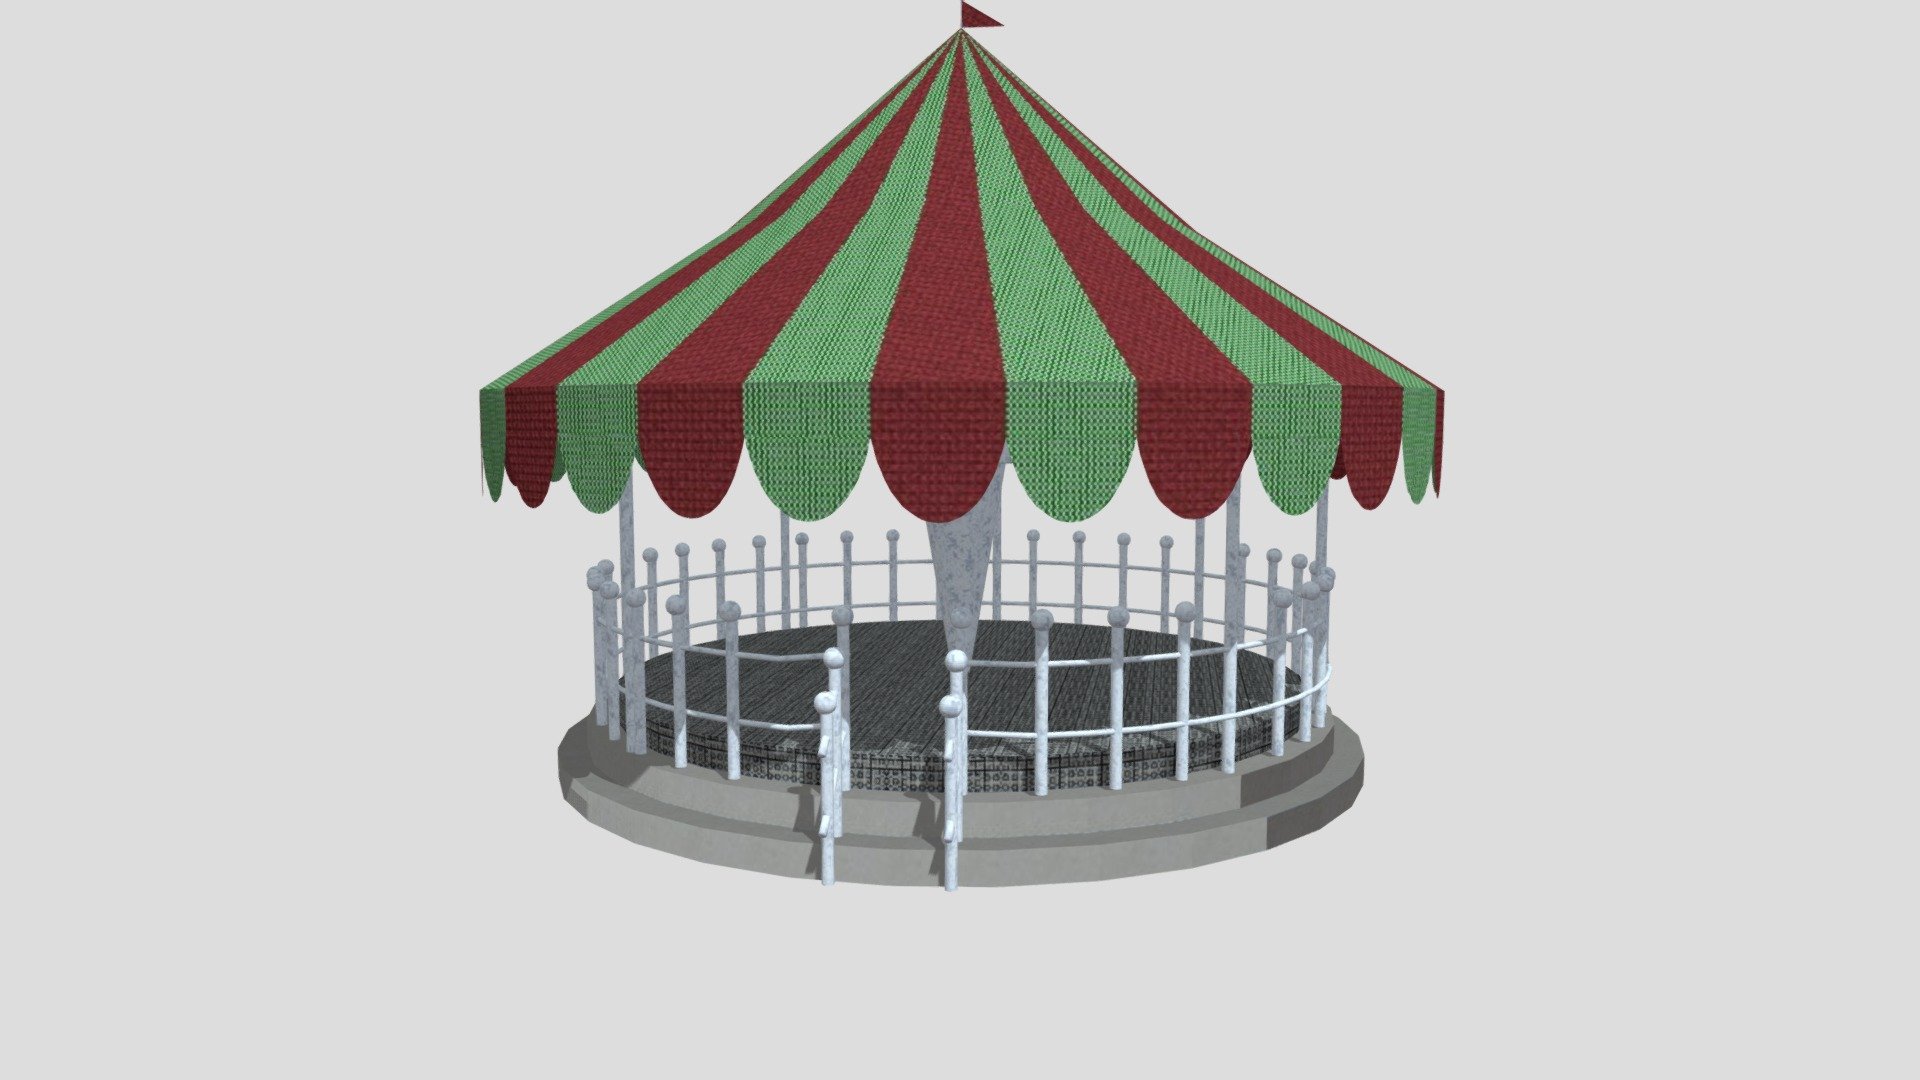 An animated carousel without the horses inside. The textures are from https://cc0textures.com/ . Please consider donating to support their work. [Early steps in Blender] Used in an Unreal Engine 4 project for the university.

The game can be downloaded from here: http://bit.ly/amusement_park_pc_game Or check the playlist of my game journey http://bit.ly/MyYoutubeGamingPlaylist

Online Portfolio: https://www.perkoules.com/ - Carousel - Download Free 3D model by Periklis 3d model